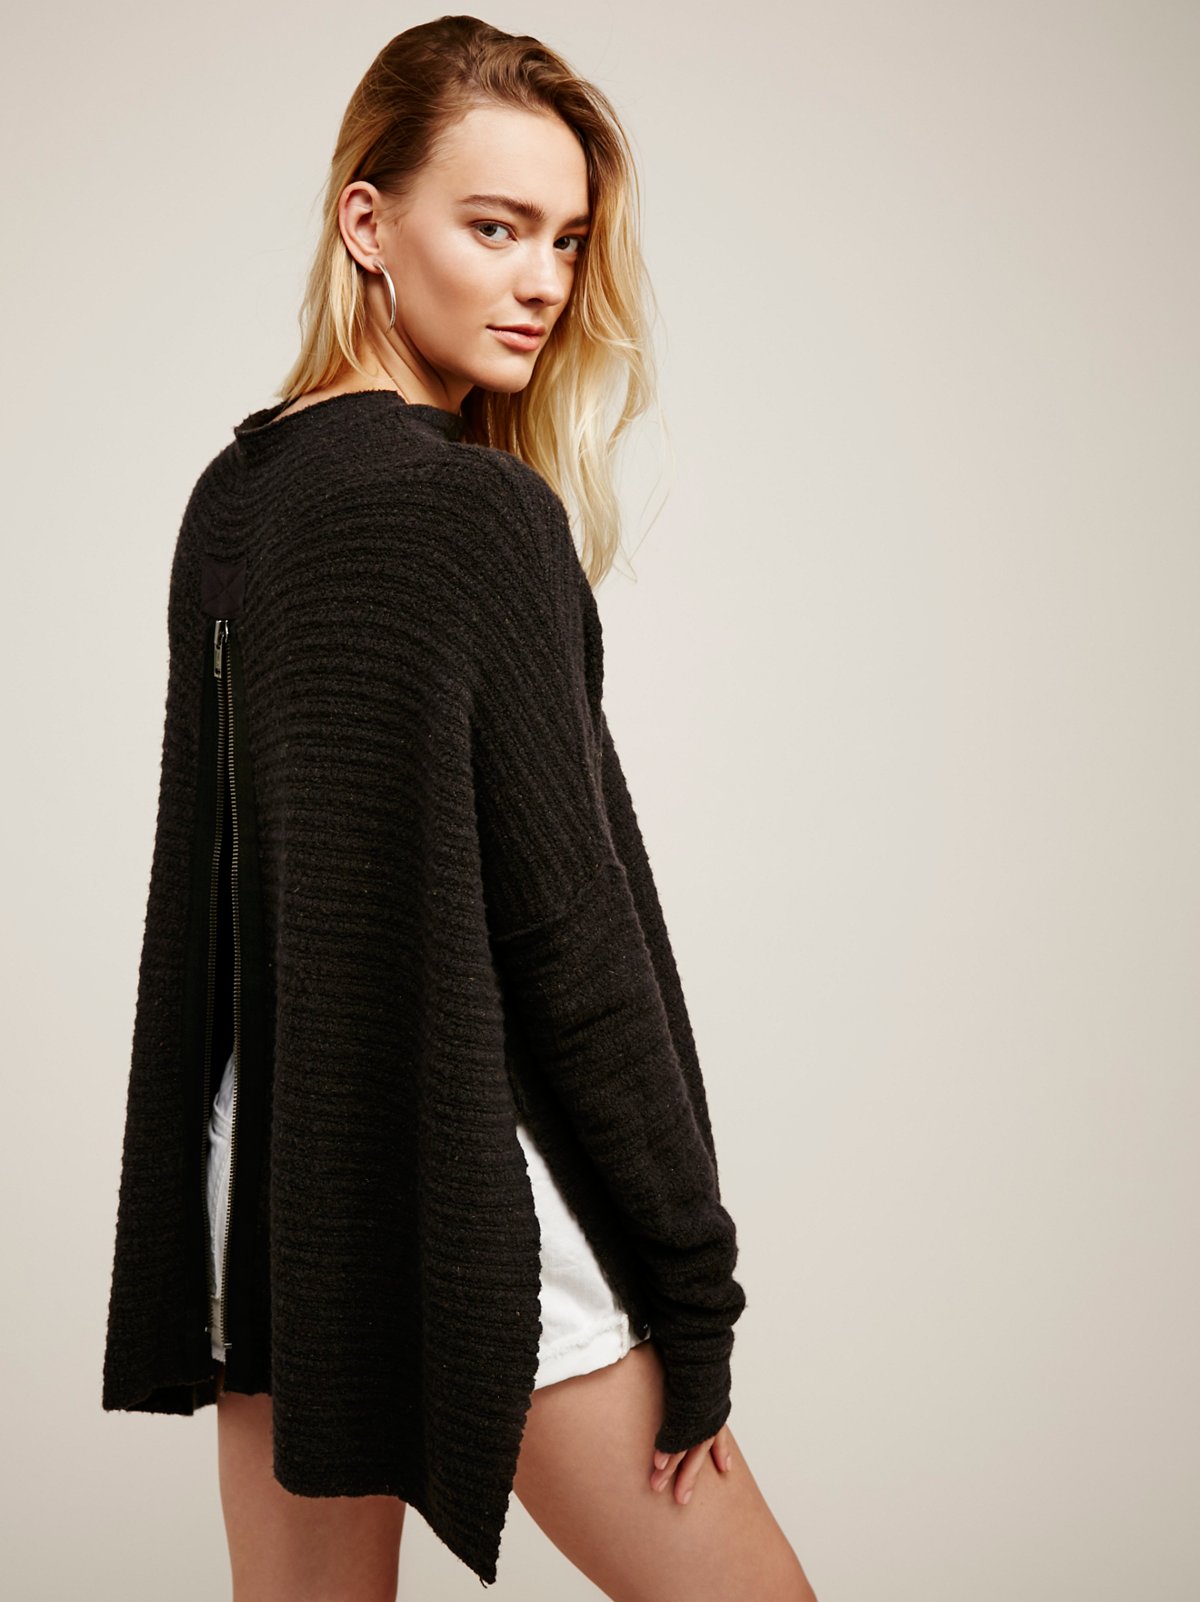 Arctic Fox Sweater at Free People Clothing Boutique